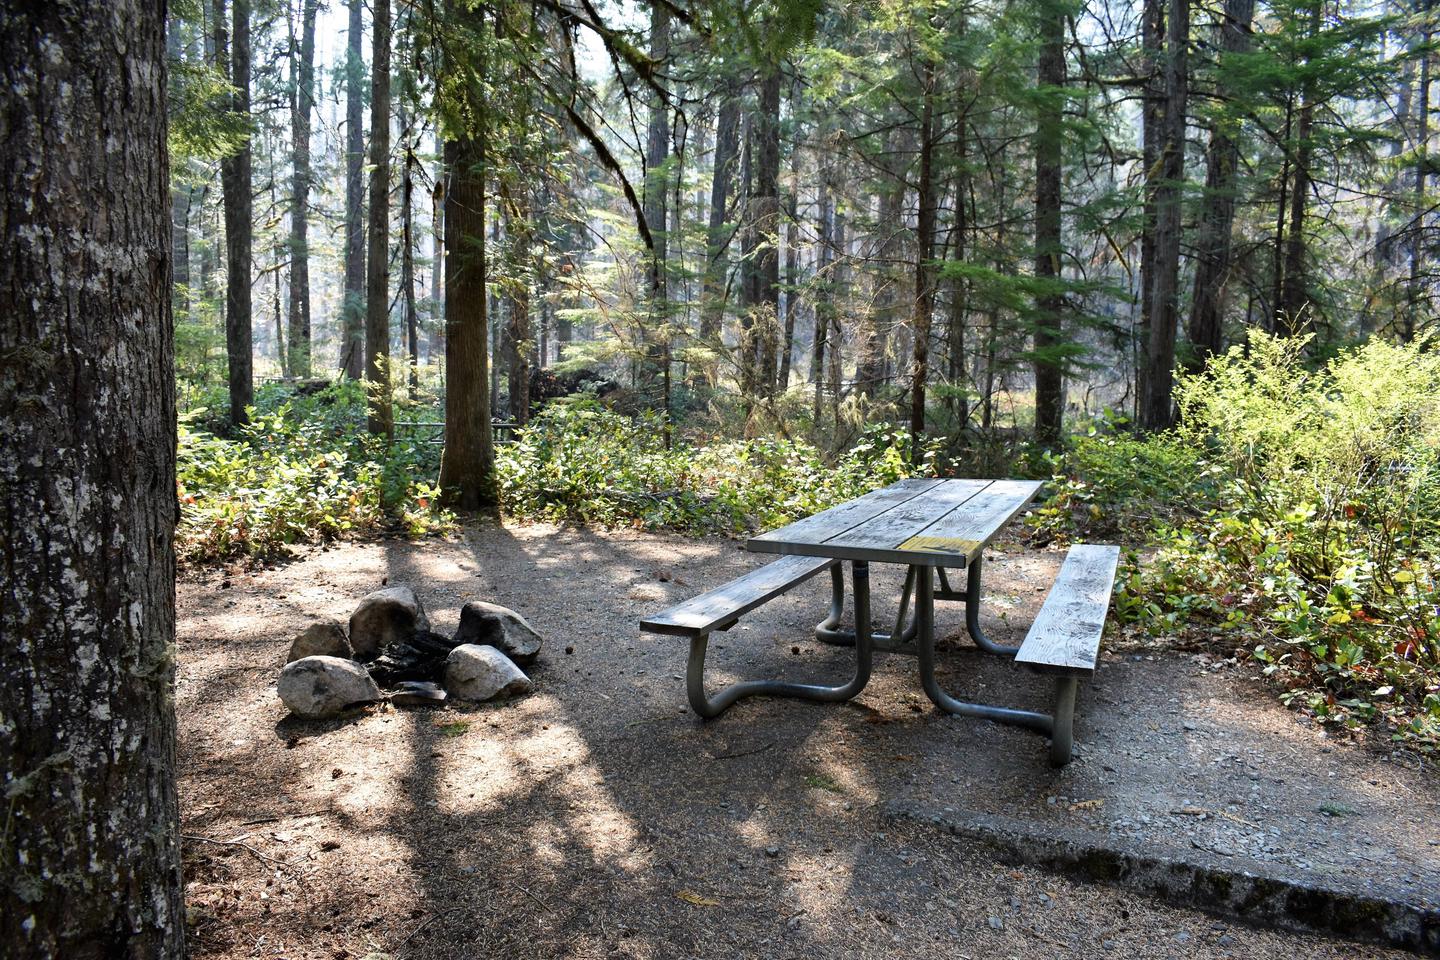 Fire ring and picnic tableView of campsite